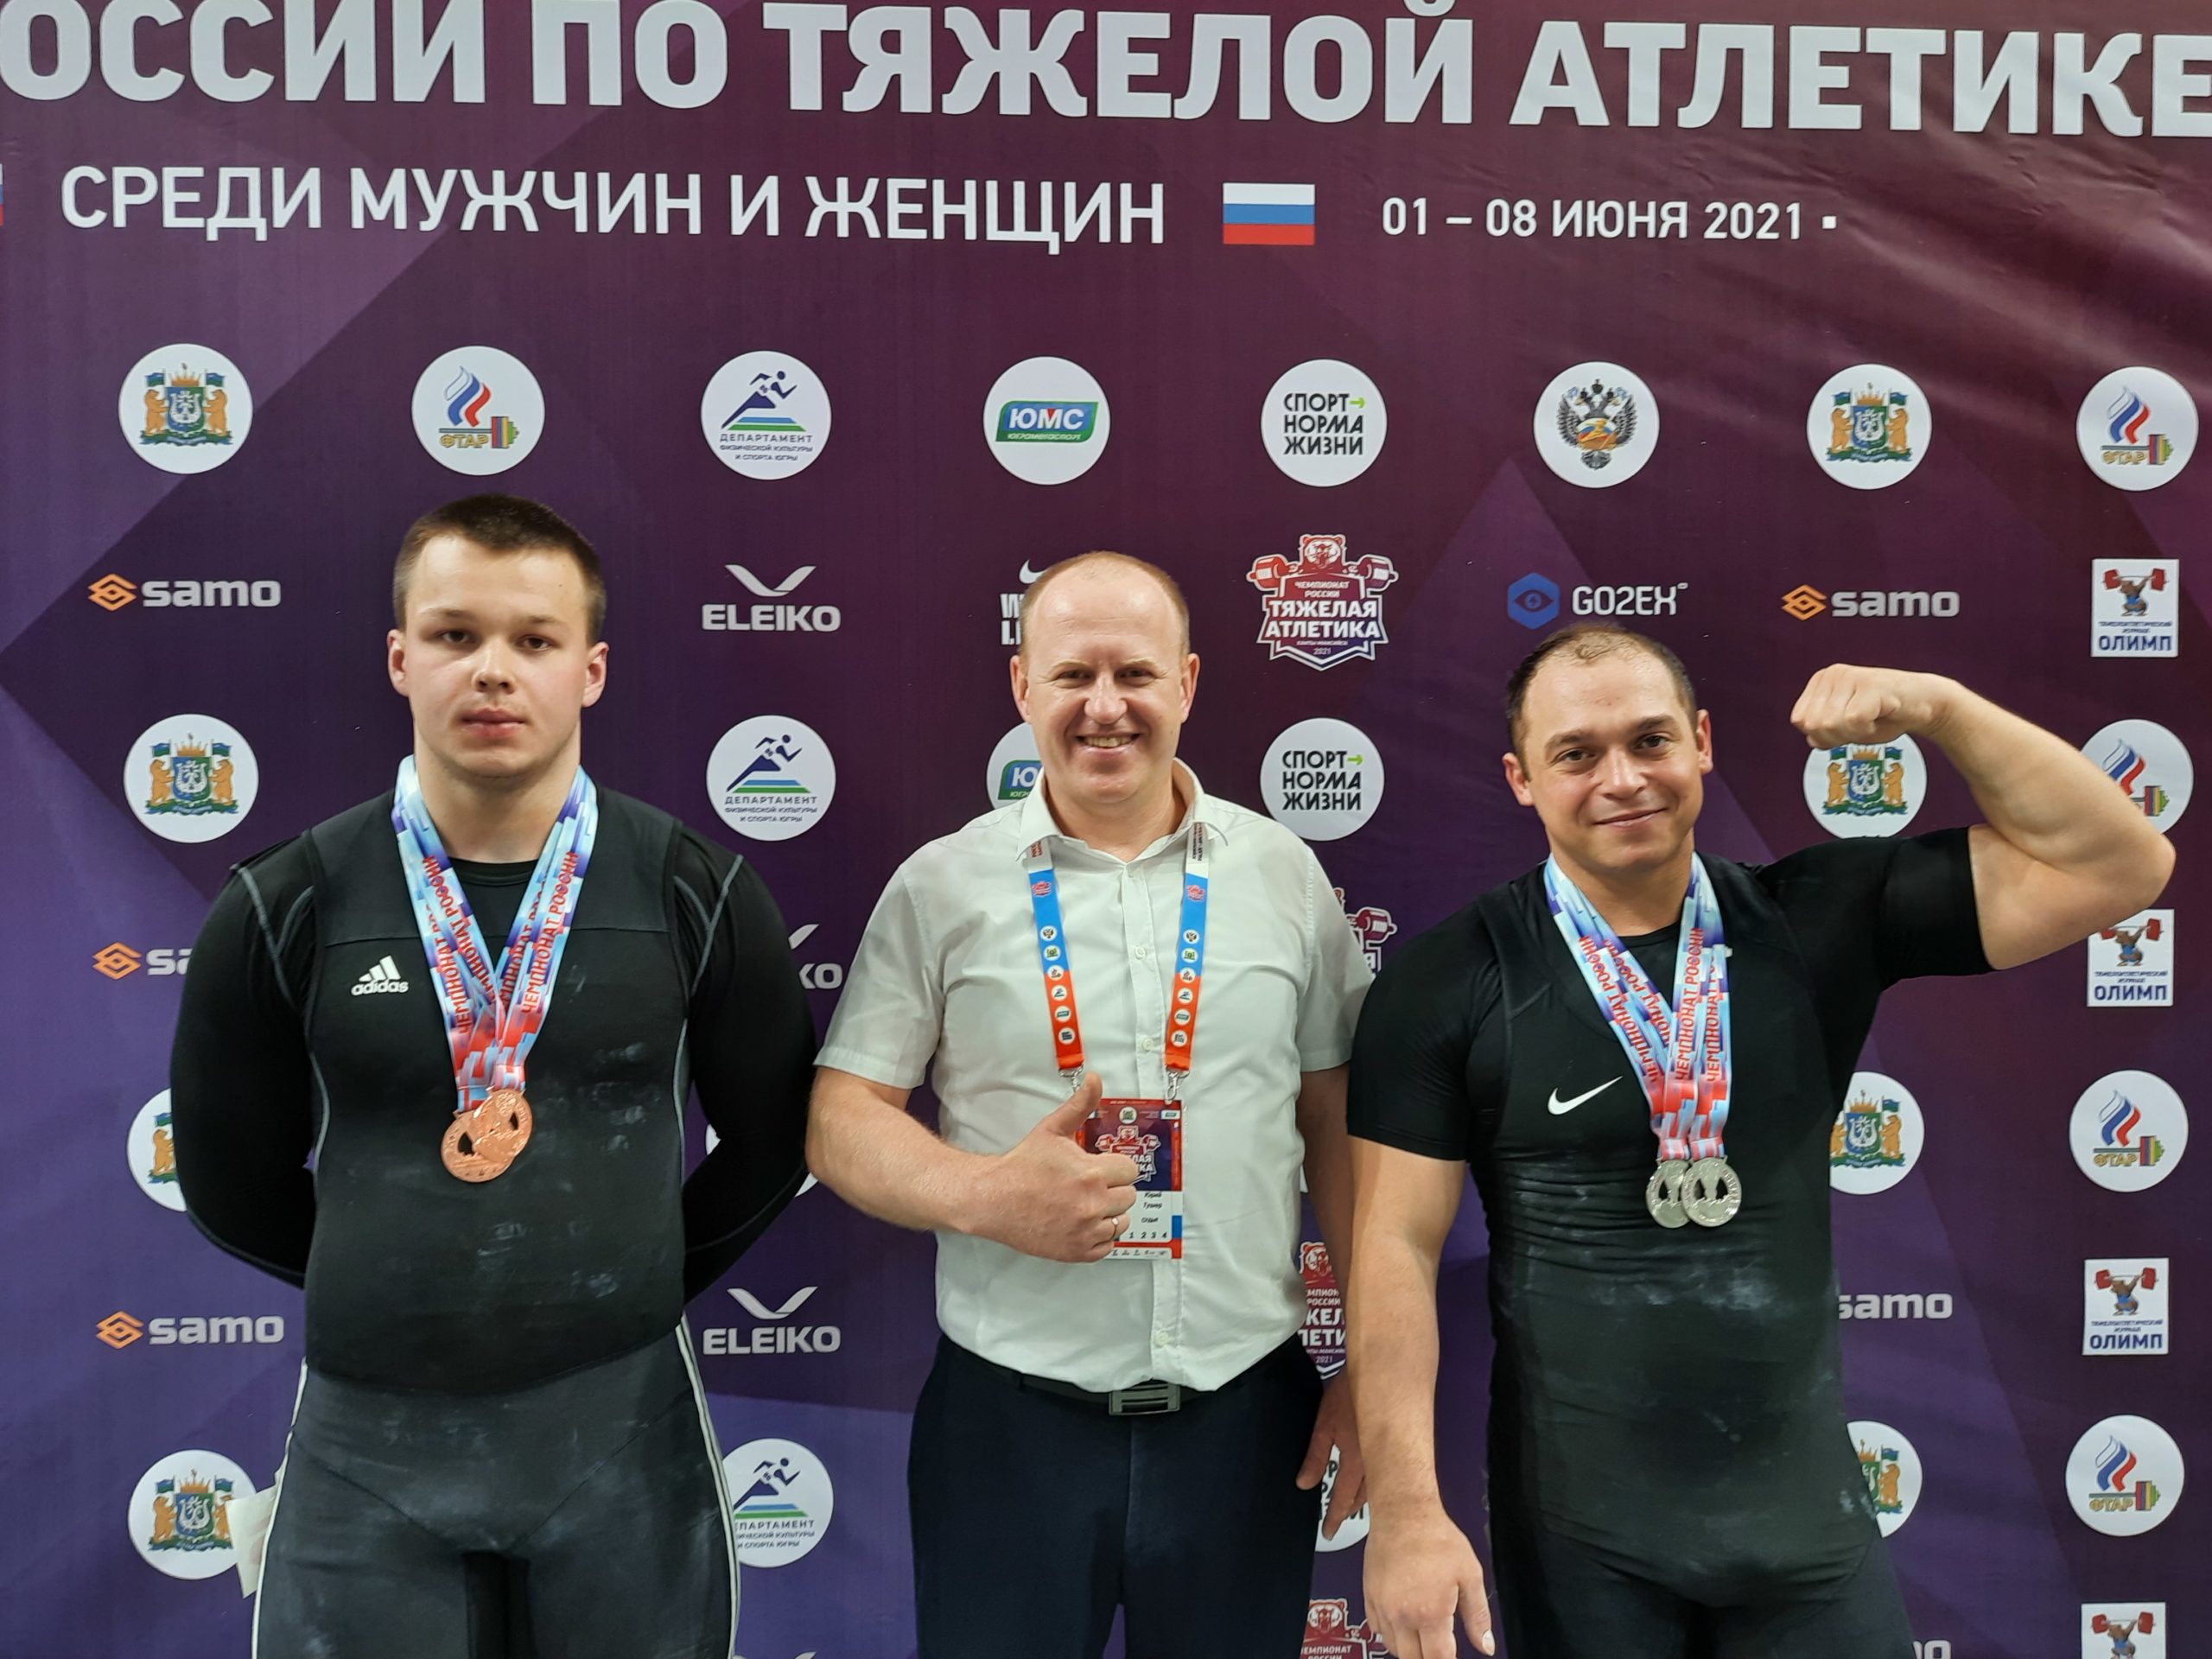 MCU students and staff at the Russian Weightlifting Cup